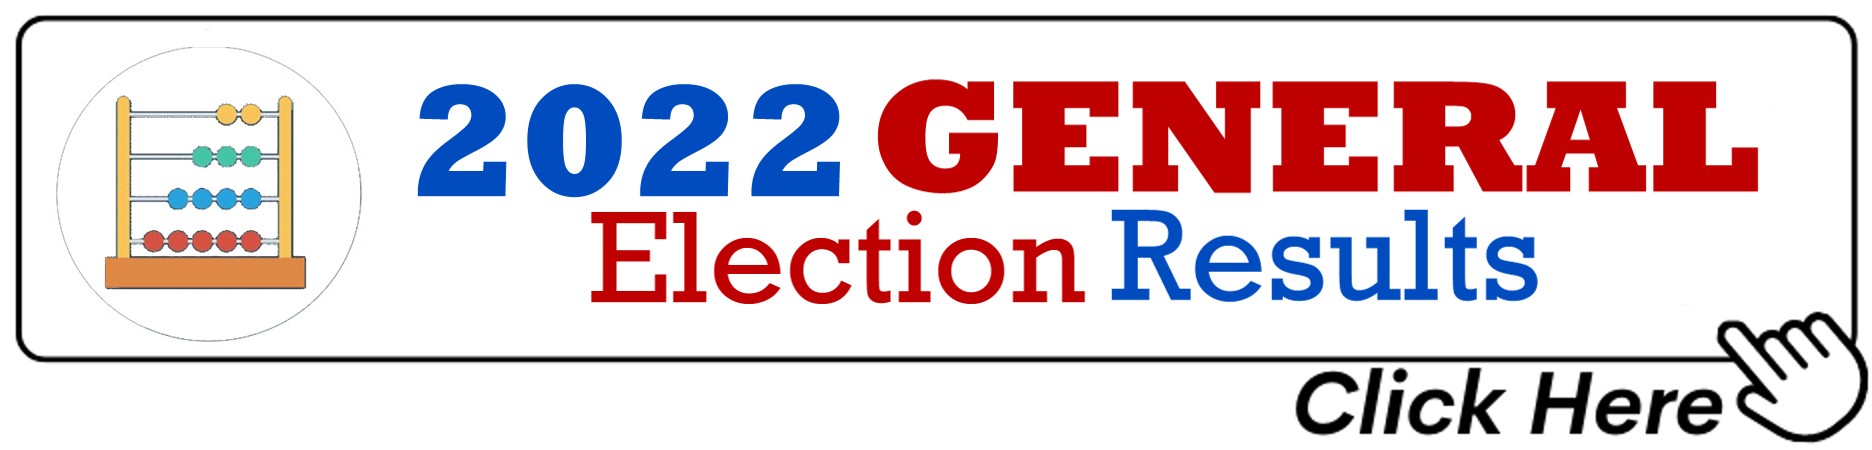 2022 General Election Results